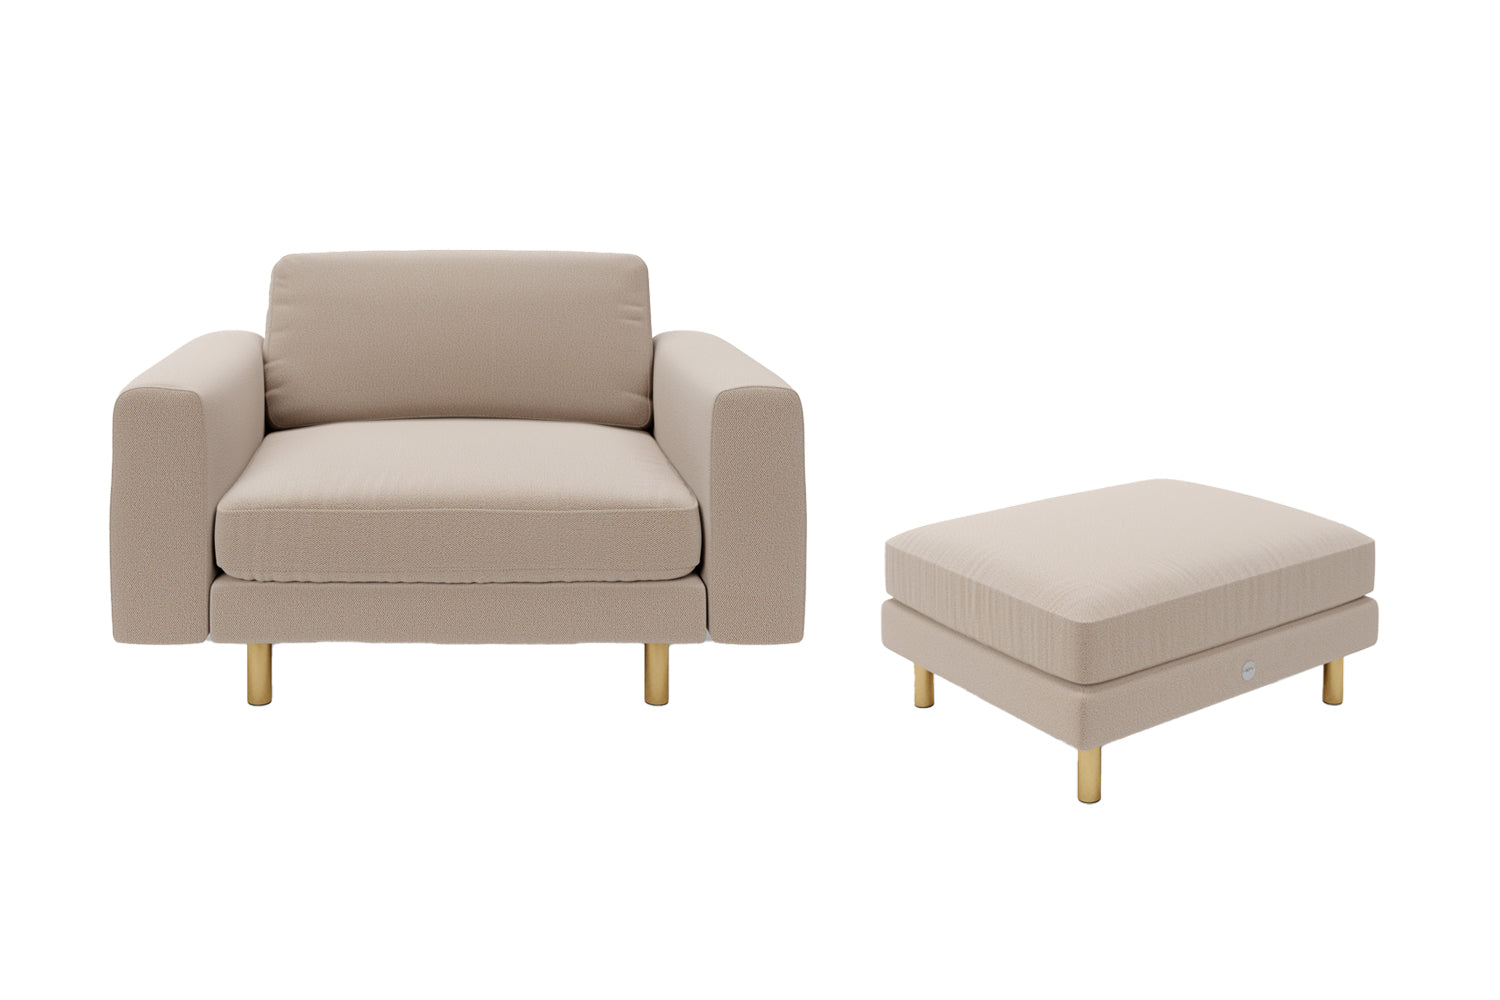 The Big Chill - 1.5 Seater Snuggler and Footstool Set - Oatmeal